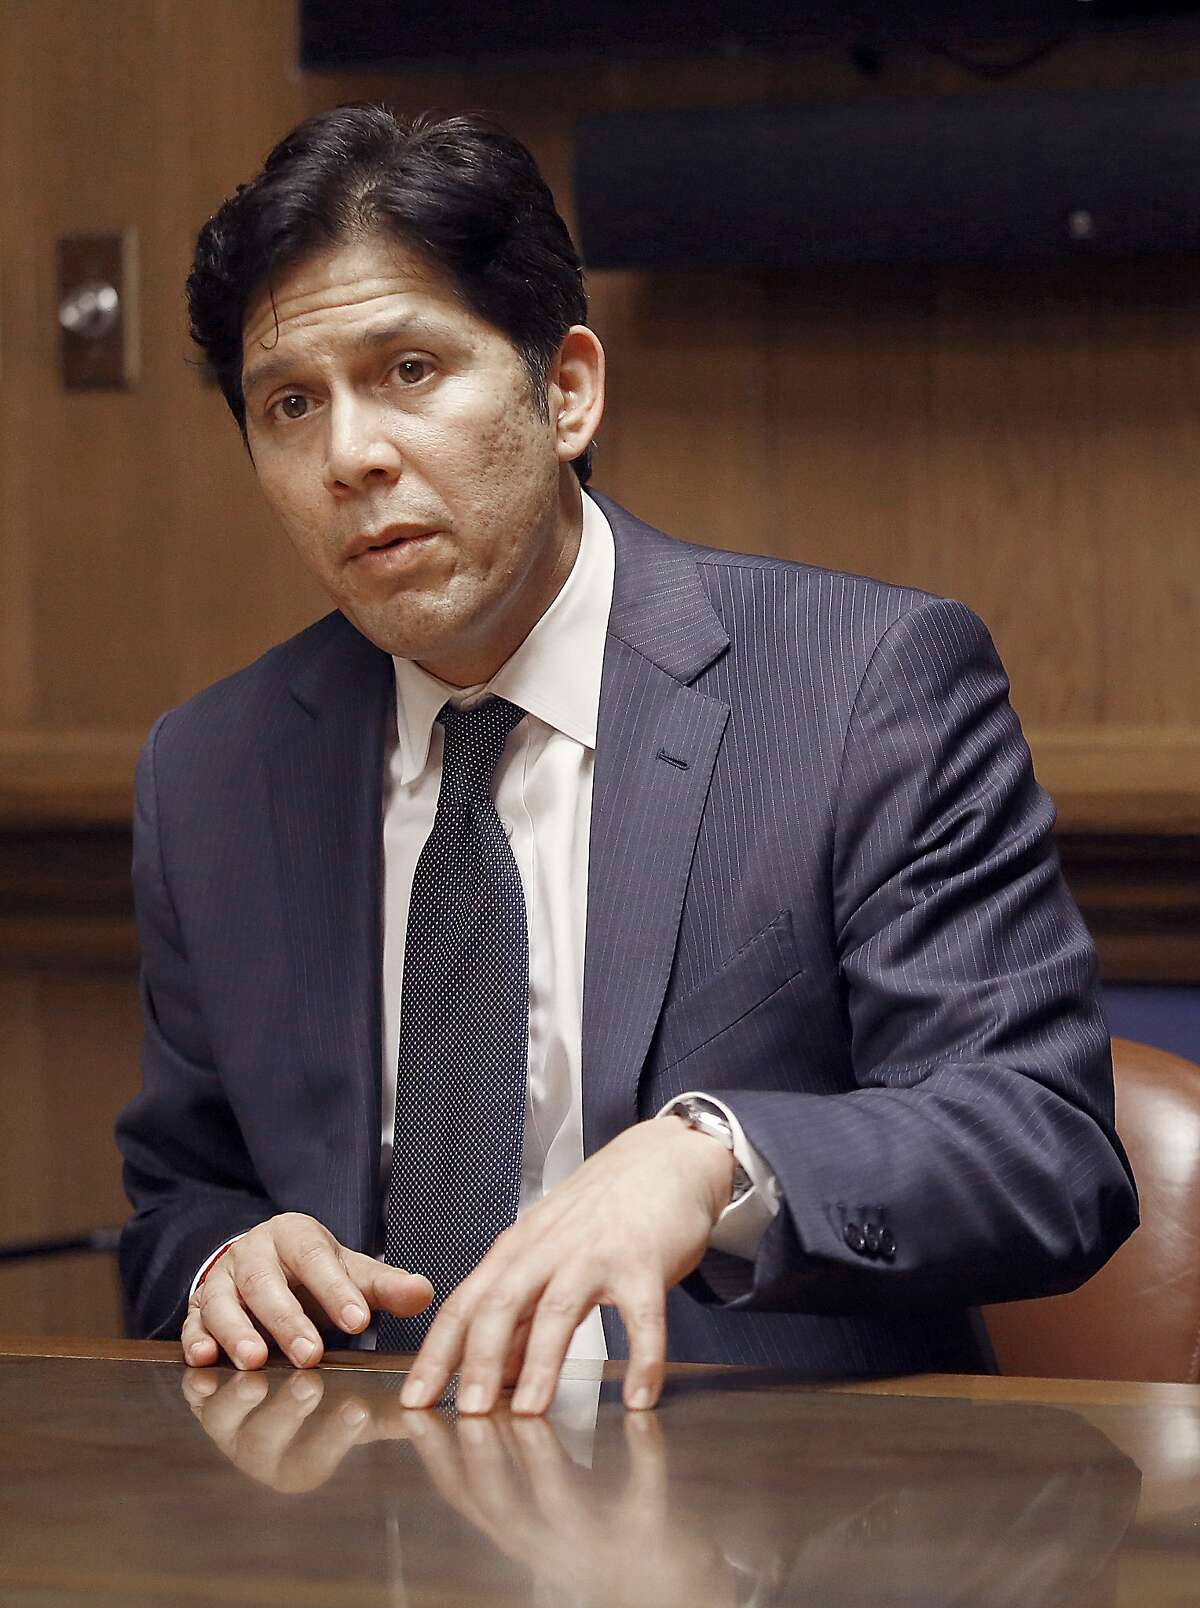 Senate President pro Tempore Kevin de León visits the Chronicle in San Francisco, Calif., on Friday, June 26, 2015